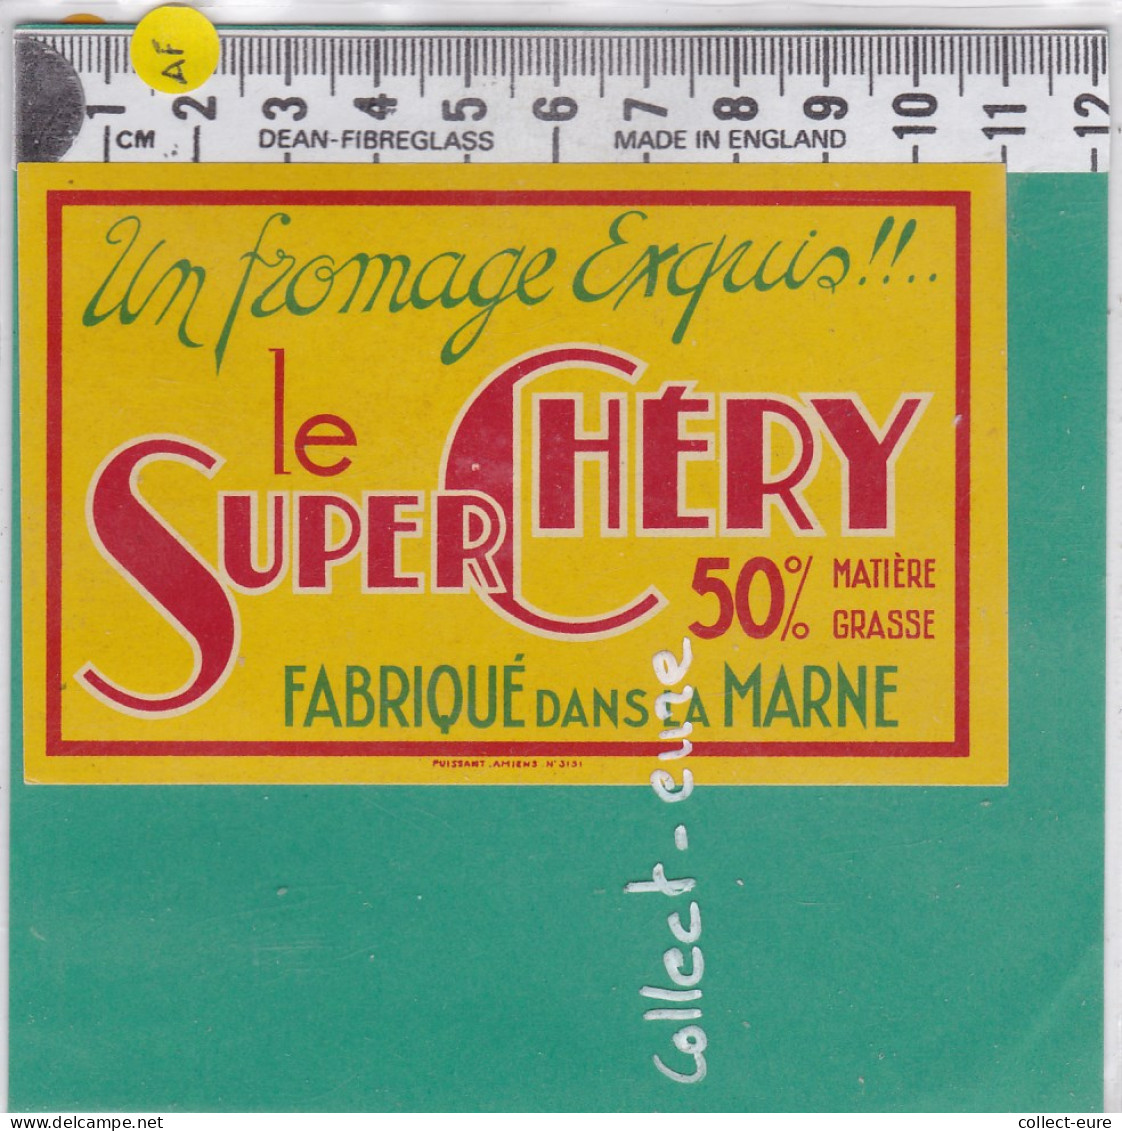 C1224 FROMAGE EXQUIS LE SUPER CHERY MARNE 50 % - Quesos